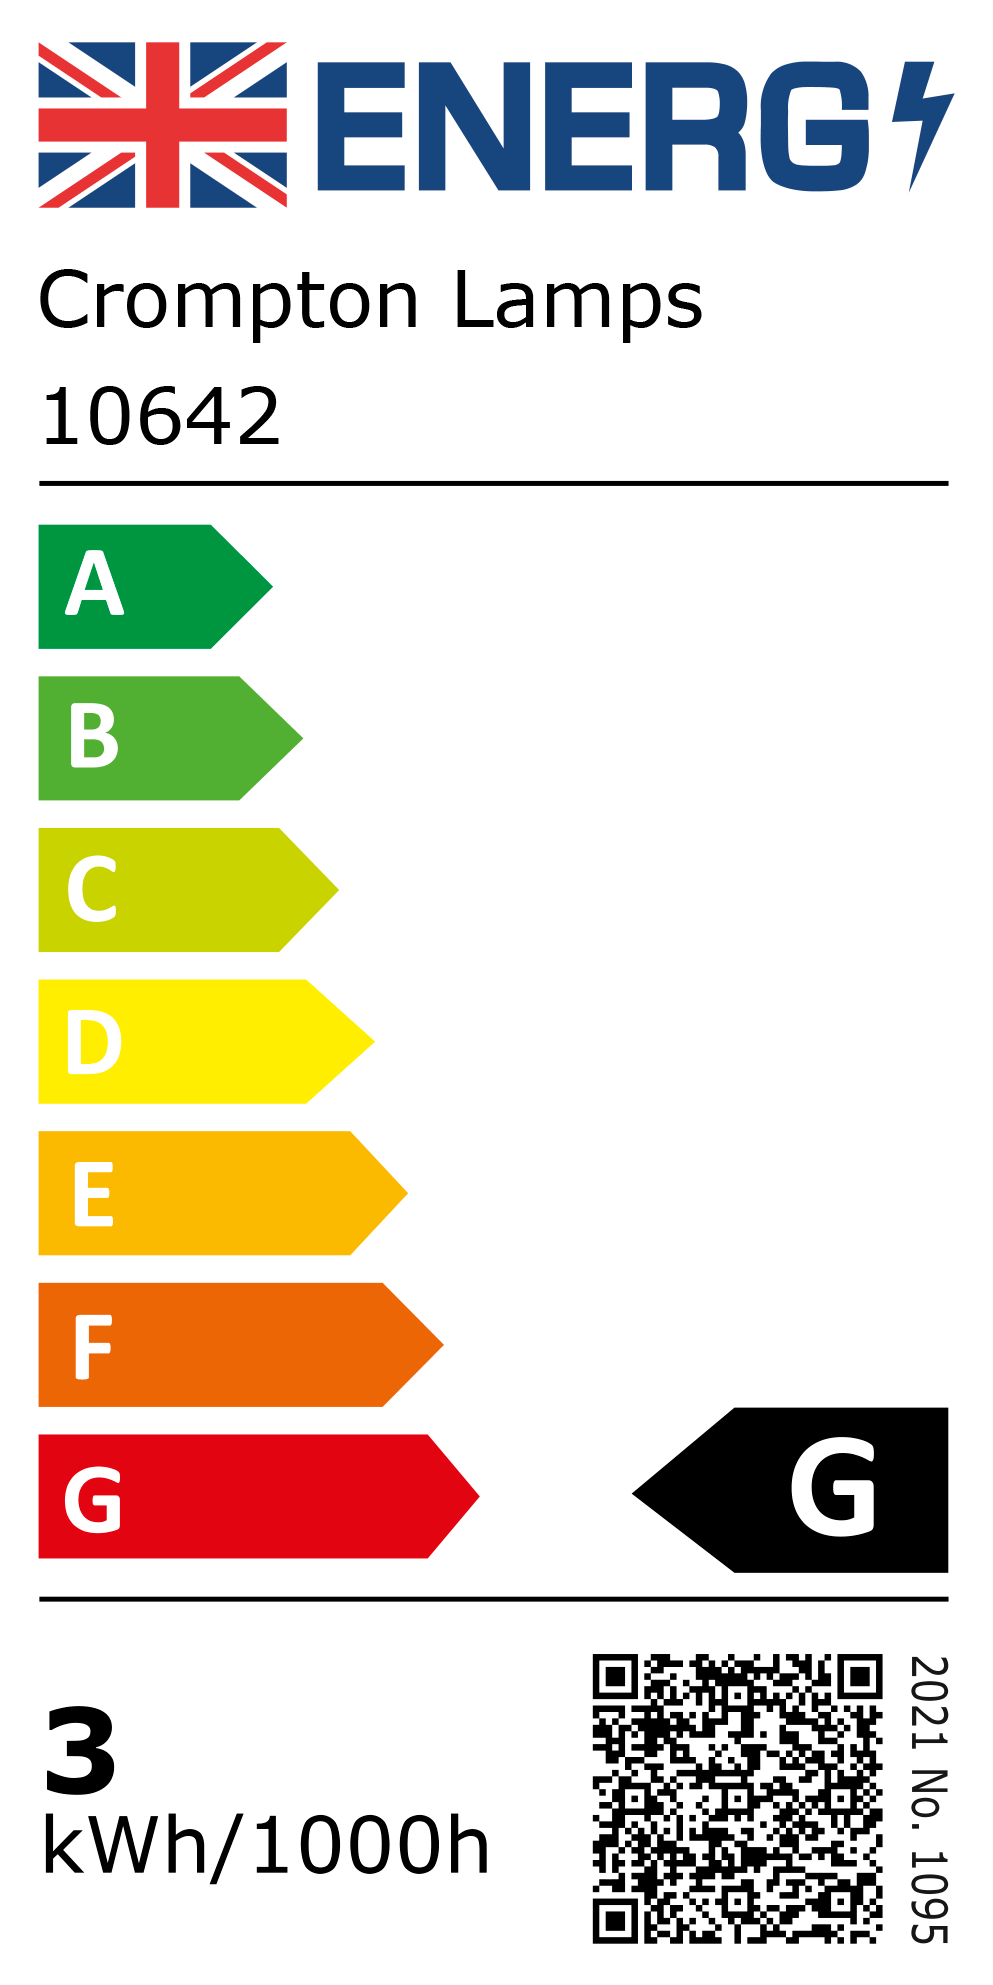 New 2021 Energy Rating Label: Stock Code 10642